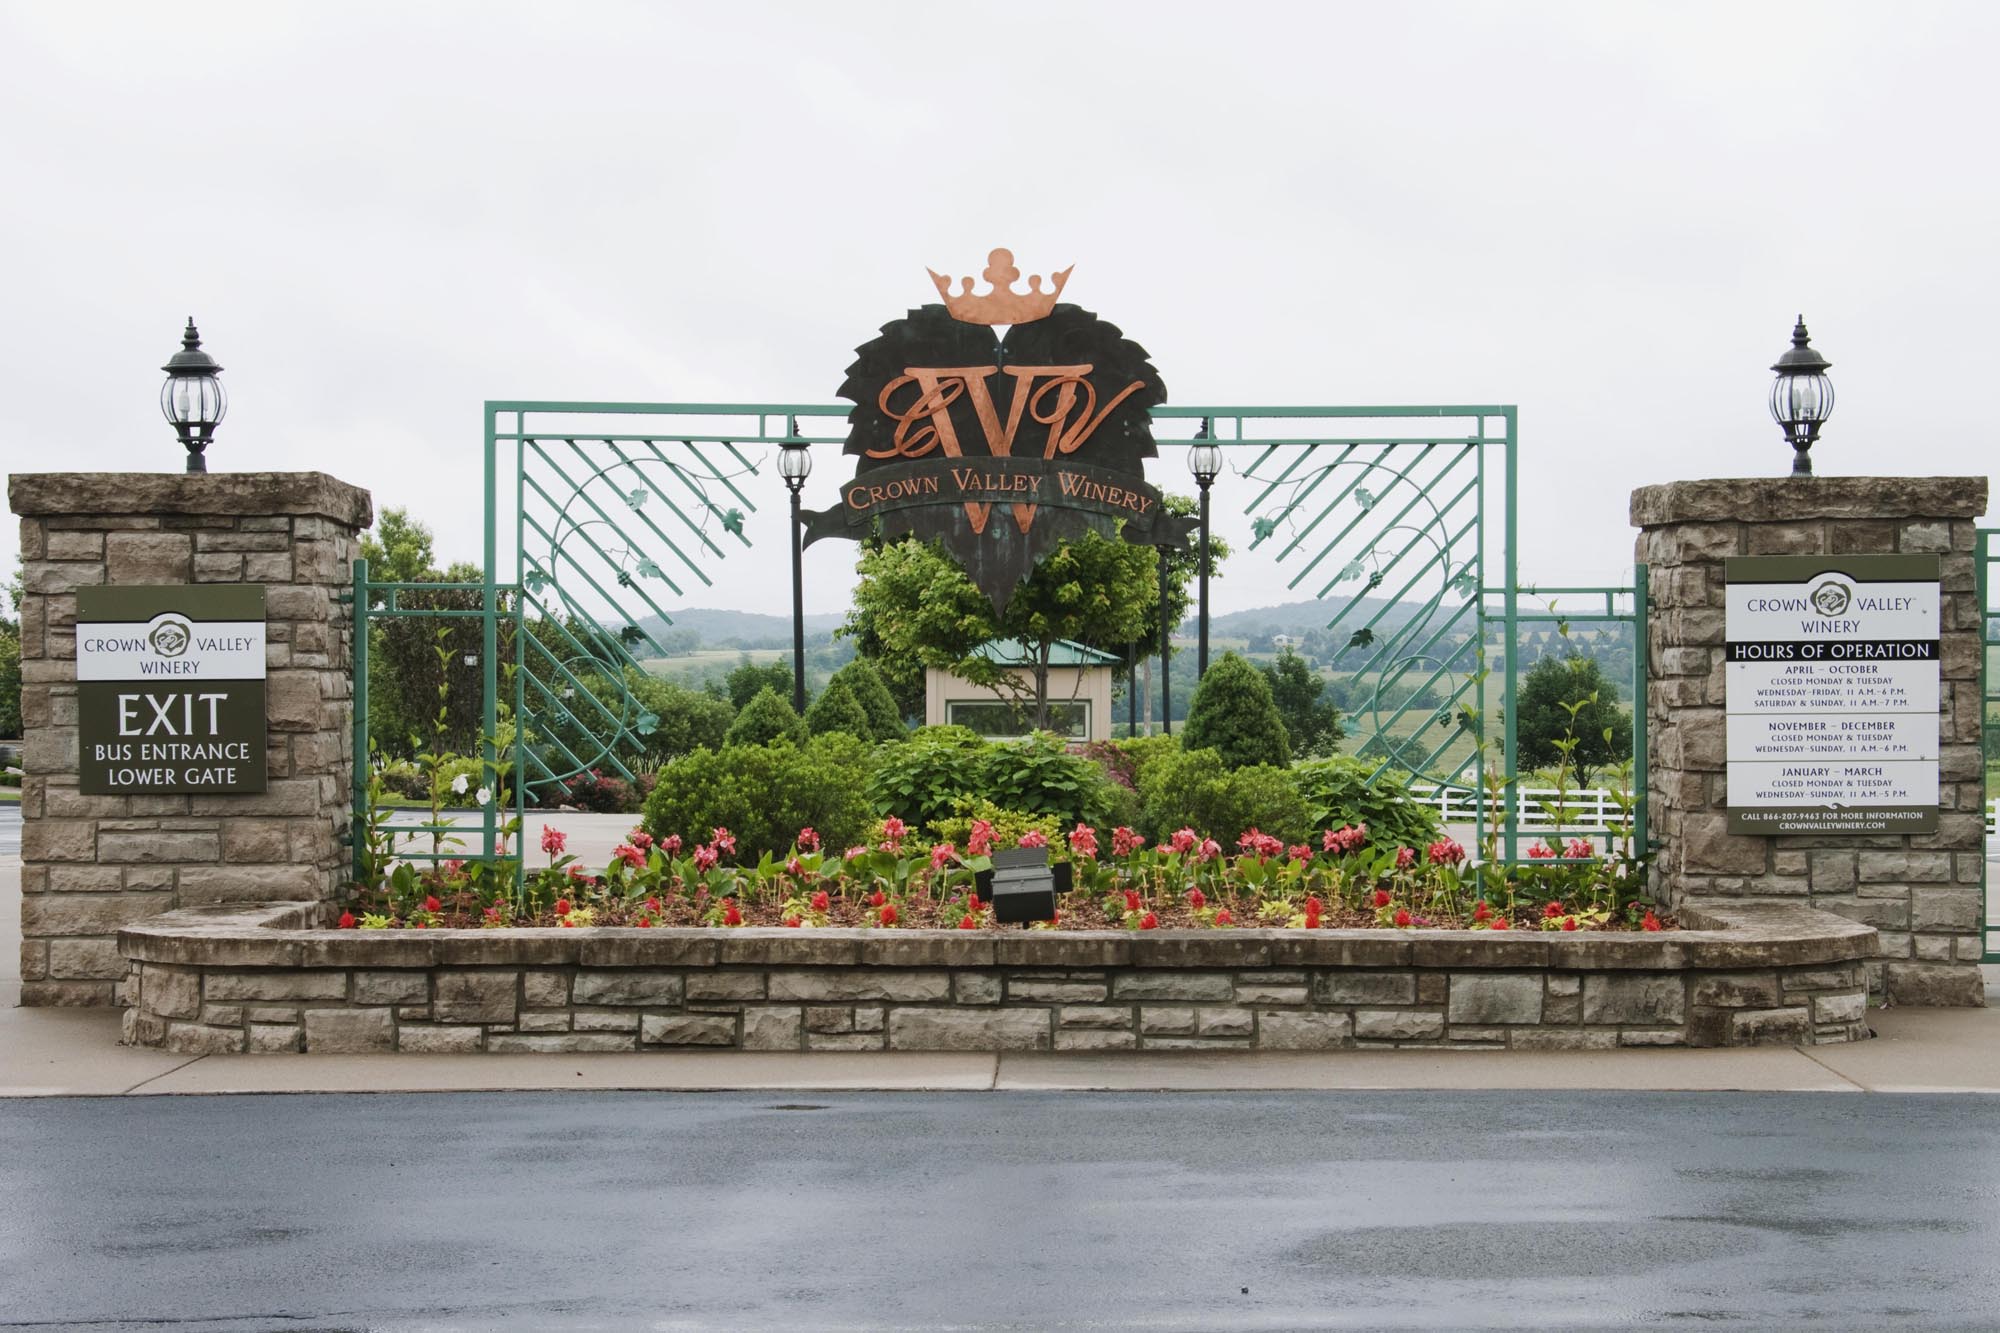 Crown Valley Winery- Entrance to the winery. Tulips planted in from of winery sign.